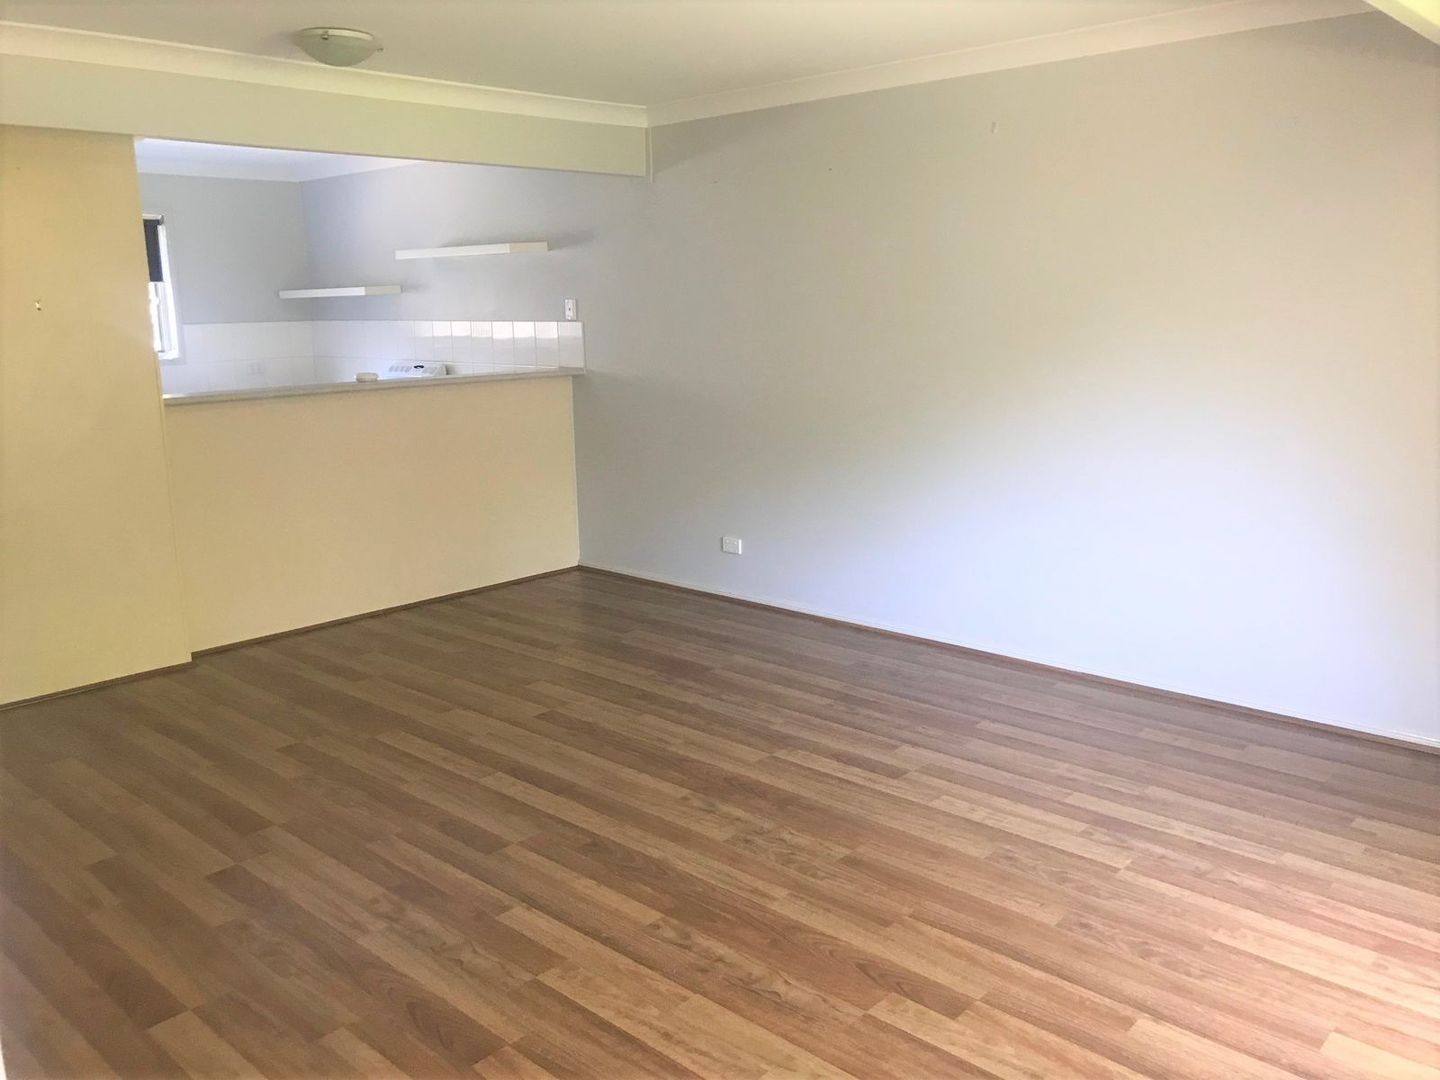 18/62 Mark Lane, Waterford West QLD 4133, Image 2